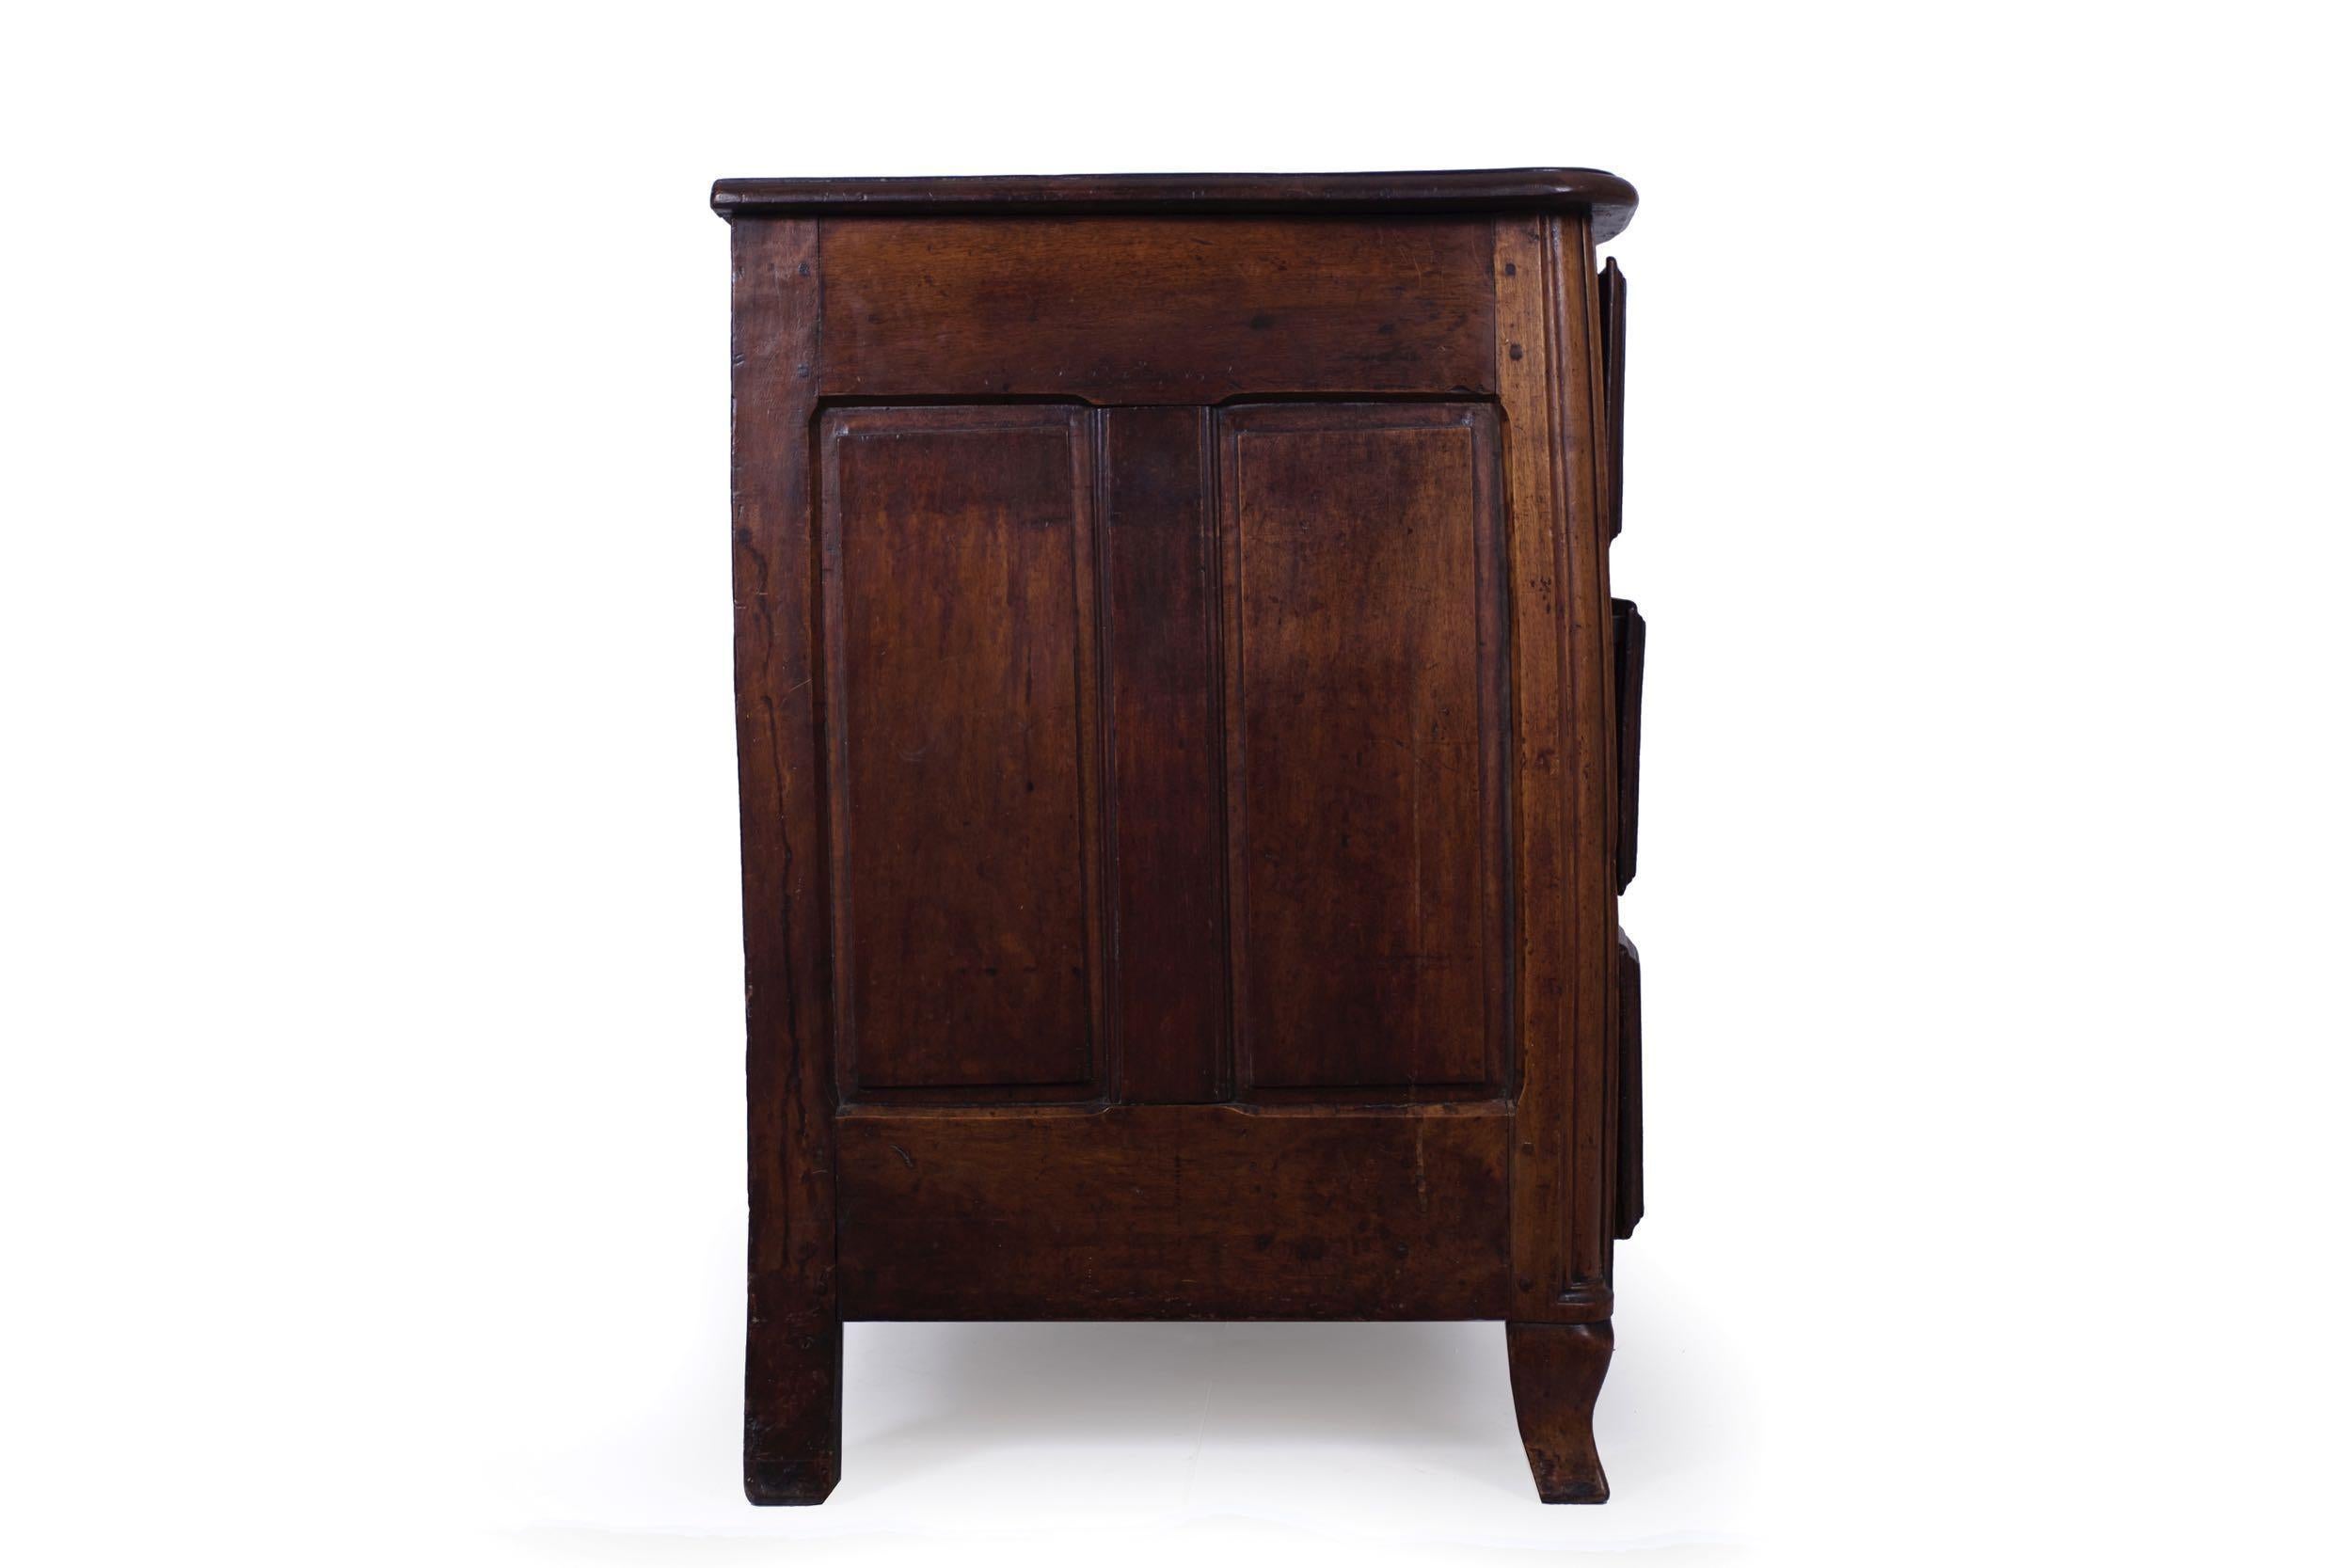 Regency 18th Century Regencé Period Walnut Commode Chest of Drawers, circa 1730-1750 For Sale